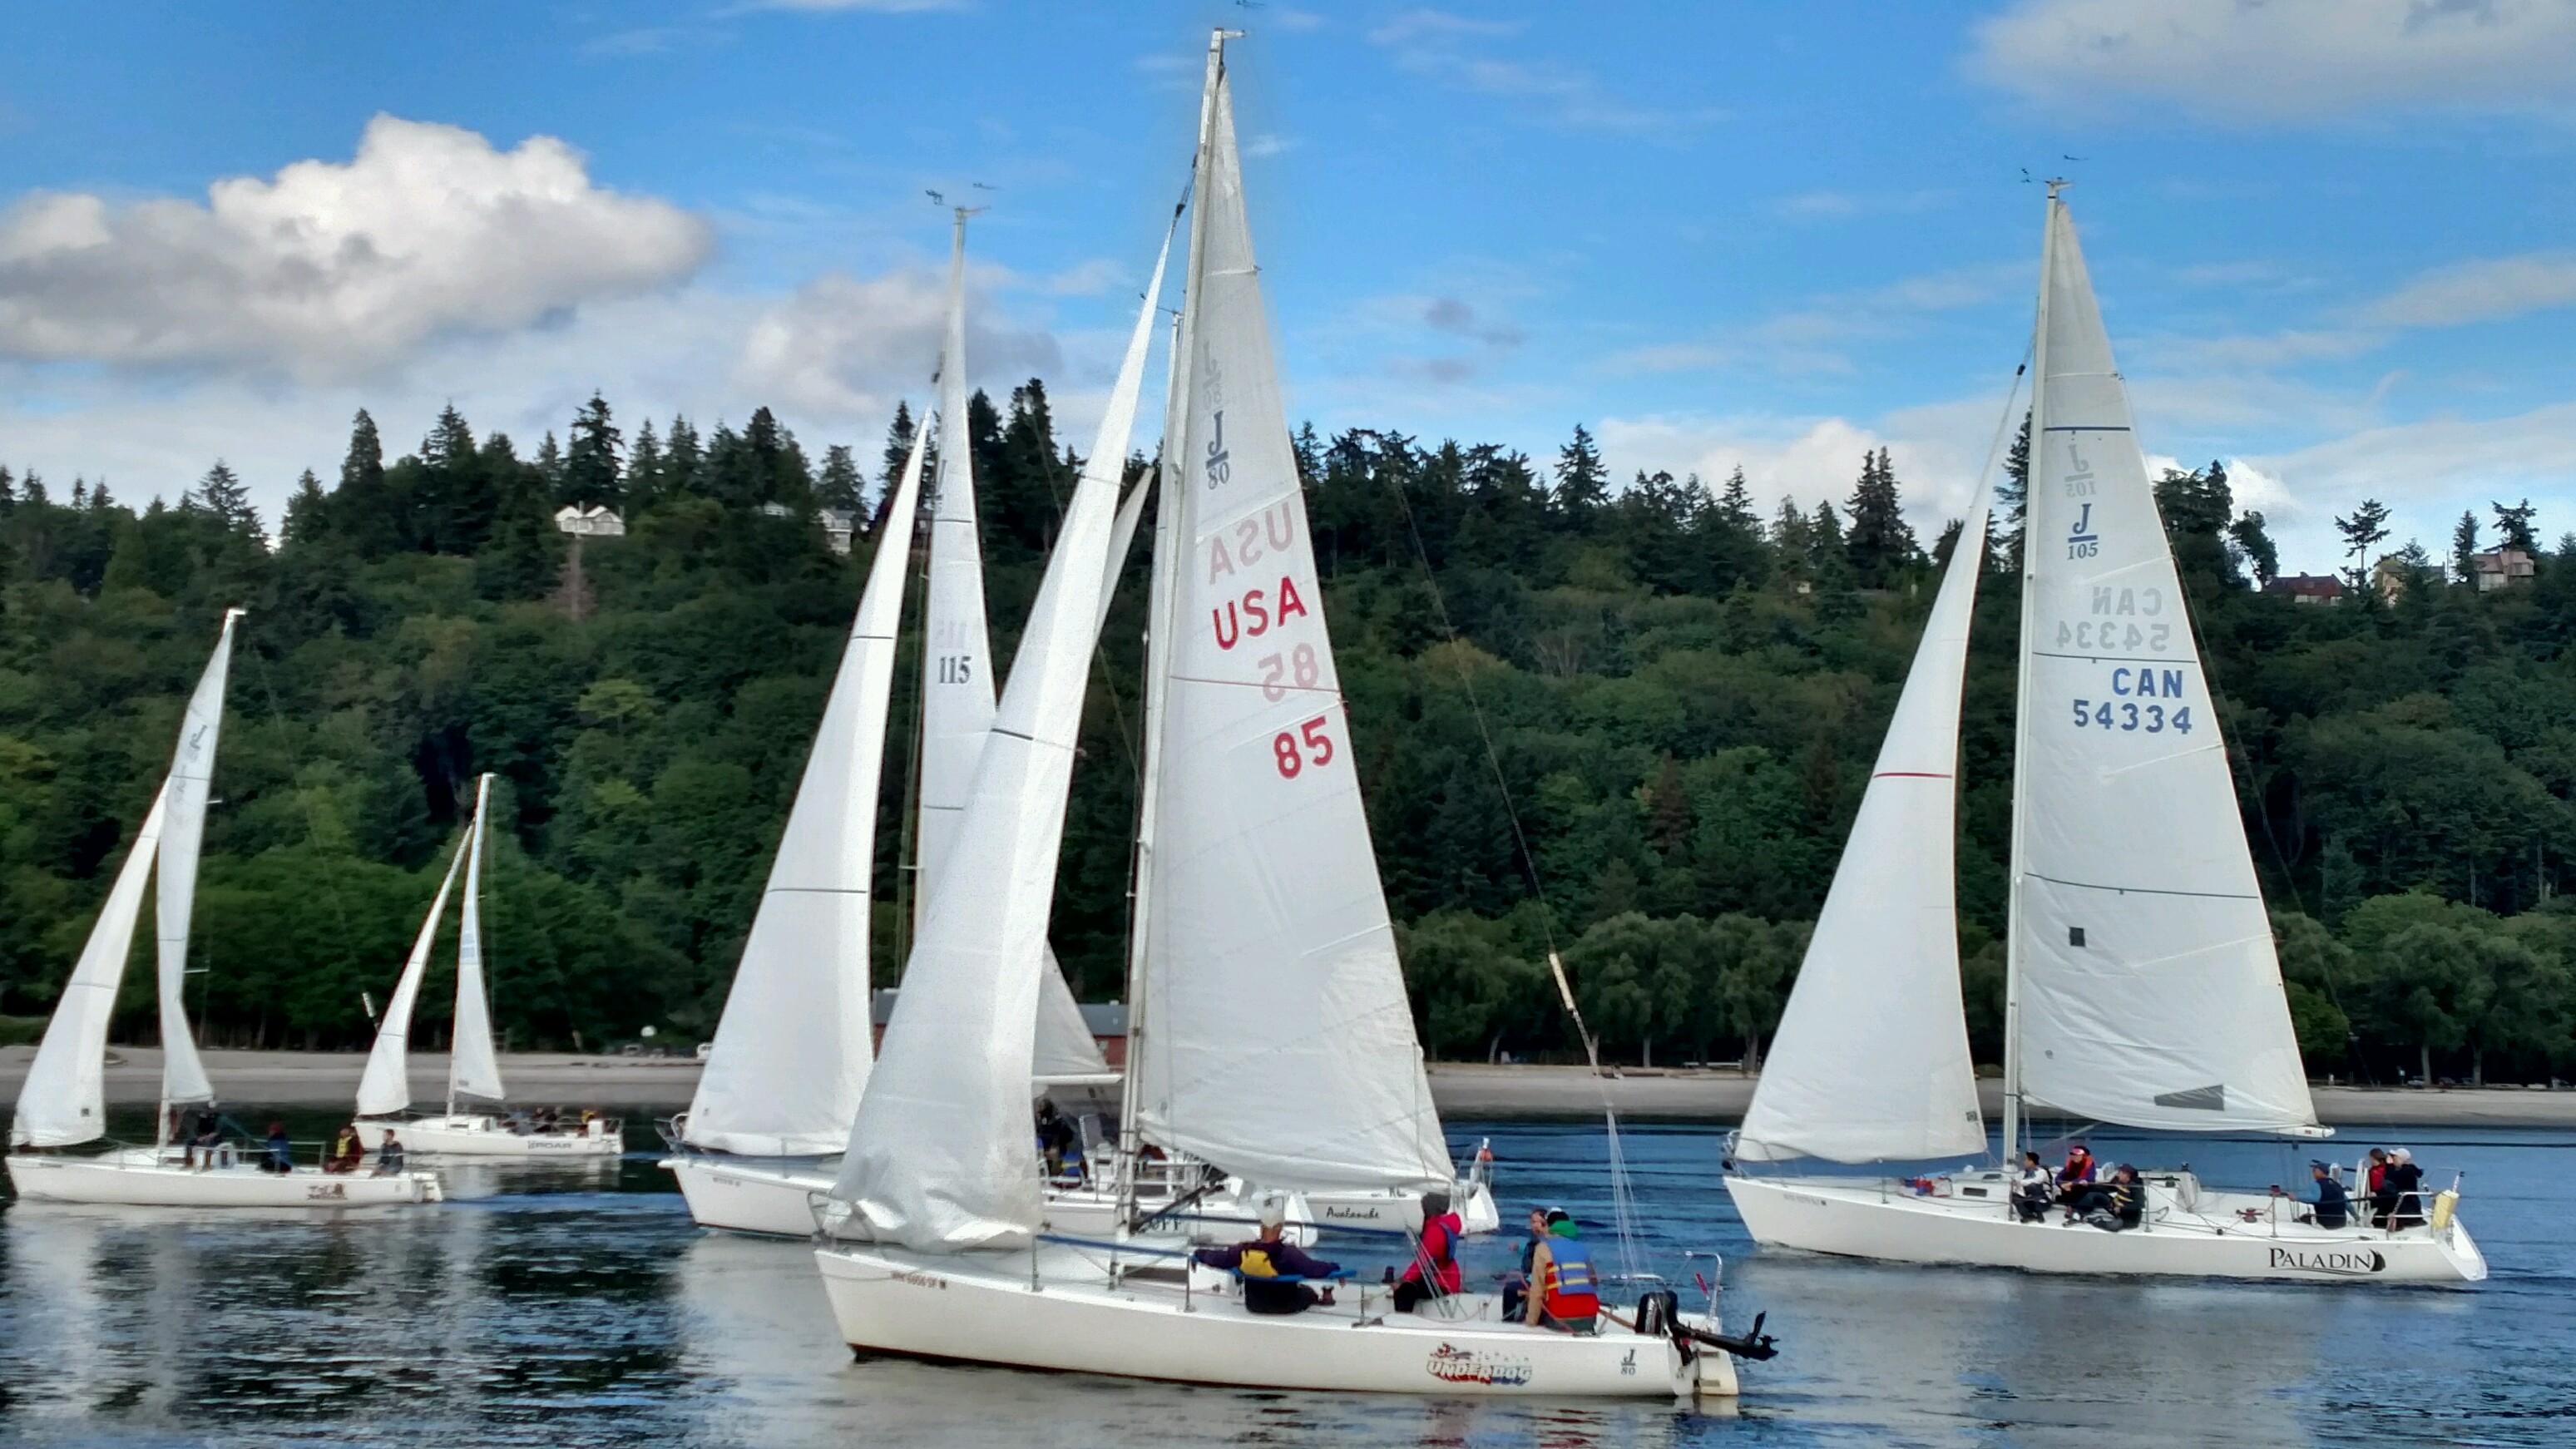 Save on Sailing Lessons